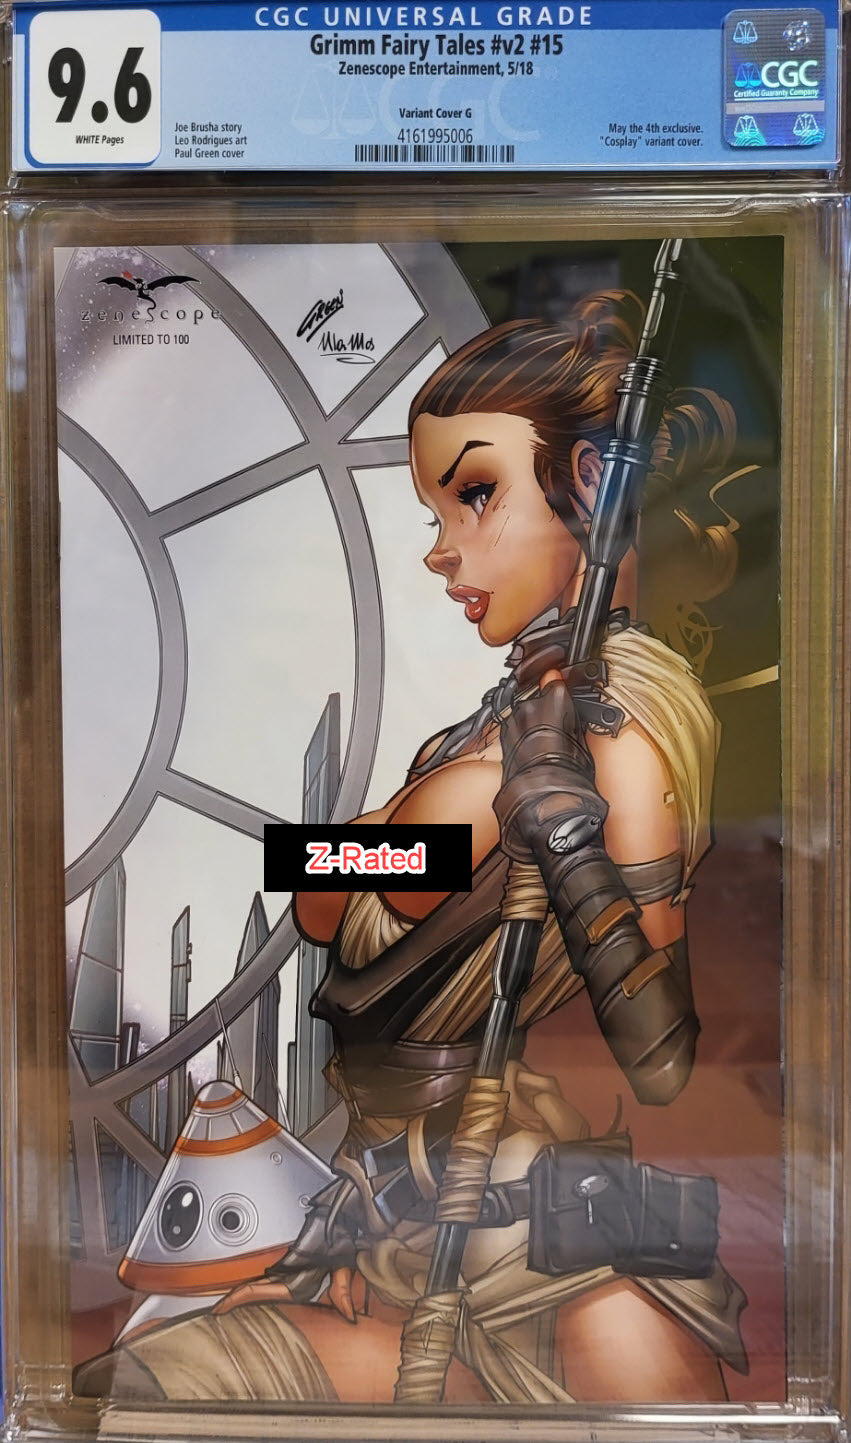 CGC 9.6 - Grimm Fairy Tales V2 #15 Z-Rated May-the-4th Cosplay